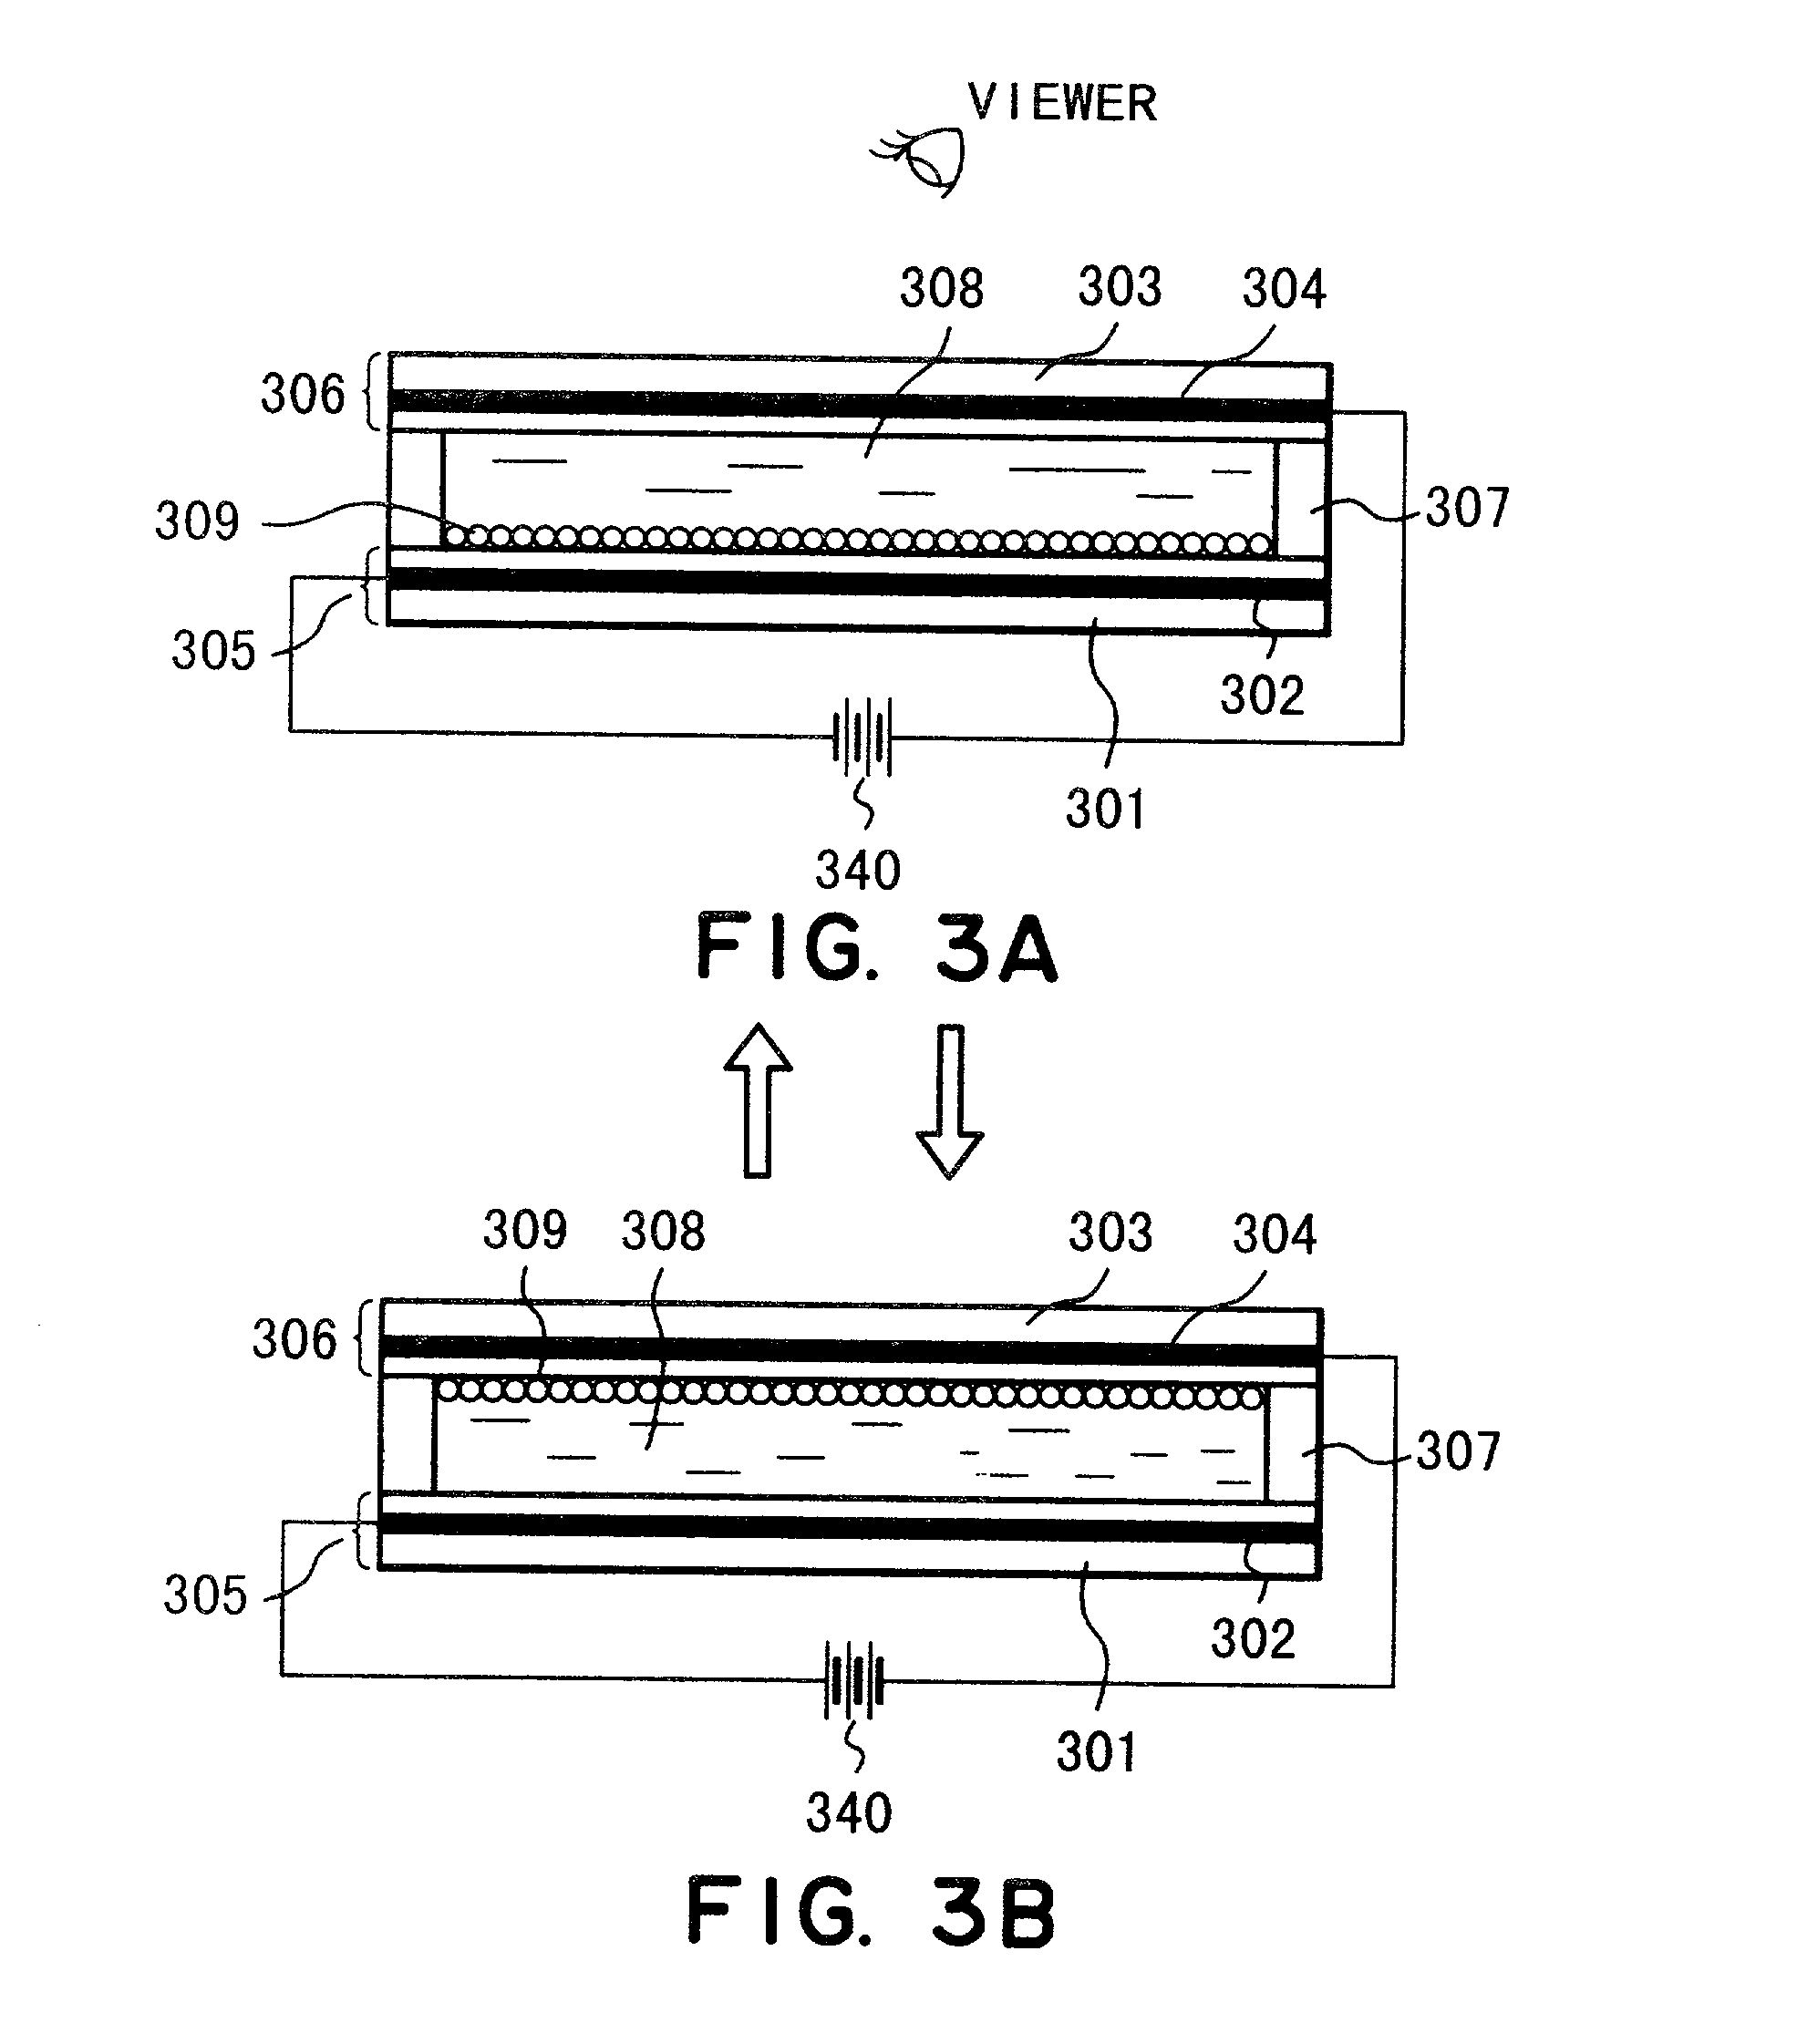 Apparatus and process for producing electrophoretic device